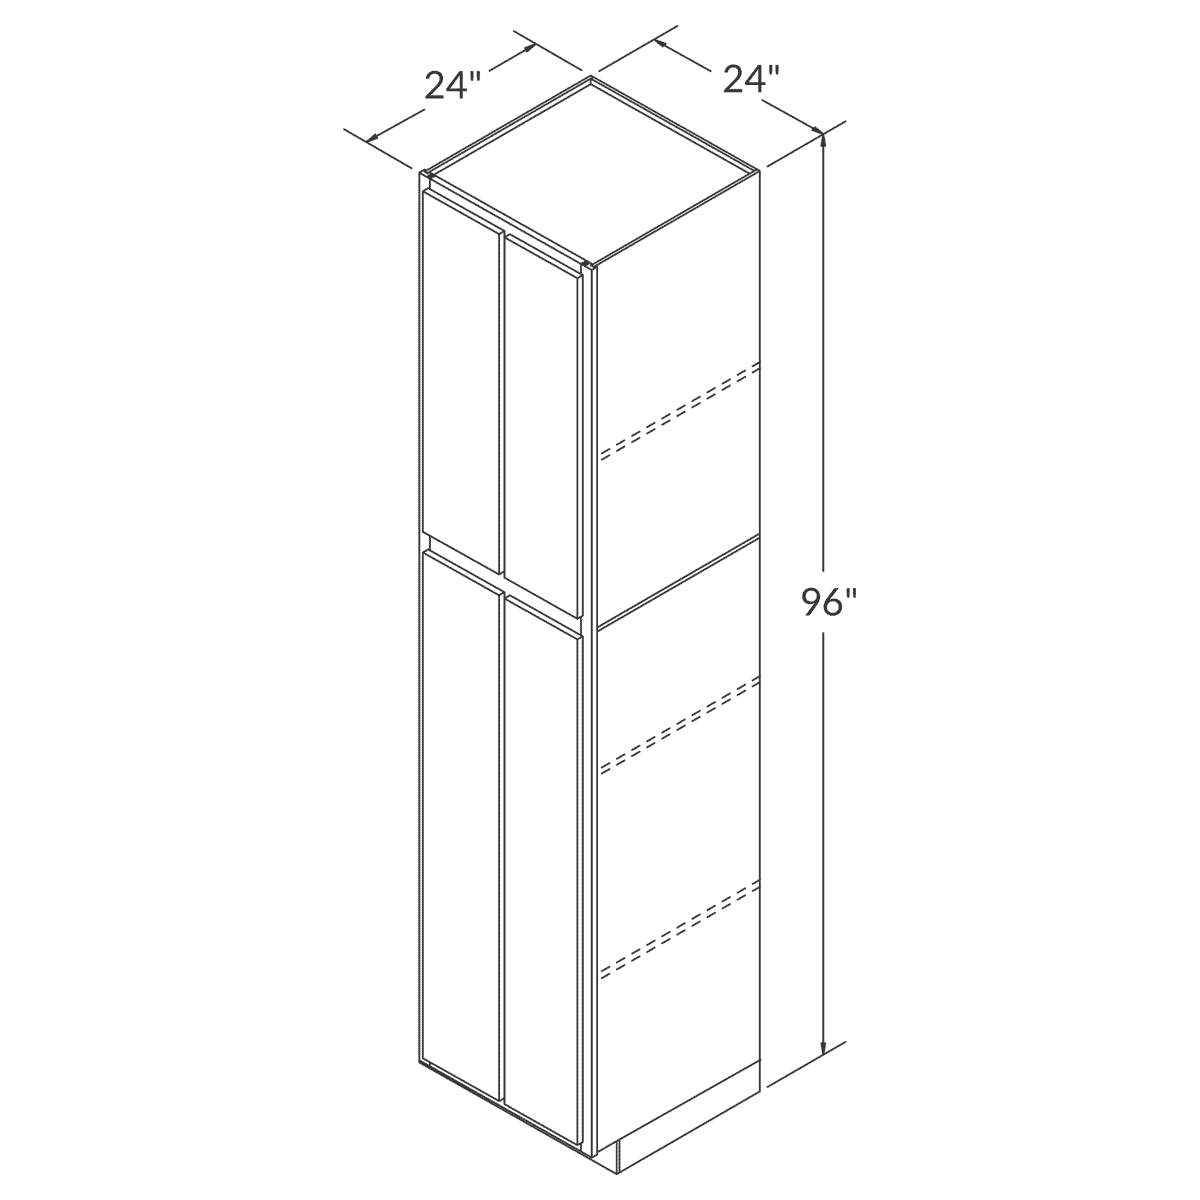 LessCare Newport Tall Pantry 24"W x 96"H Shaker Cabinet Wireframe